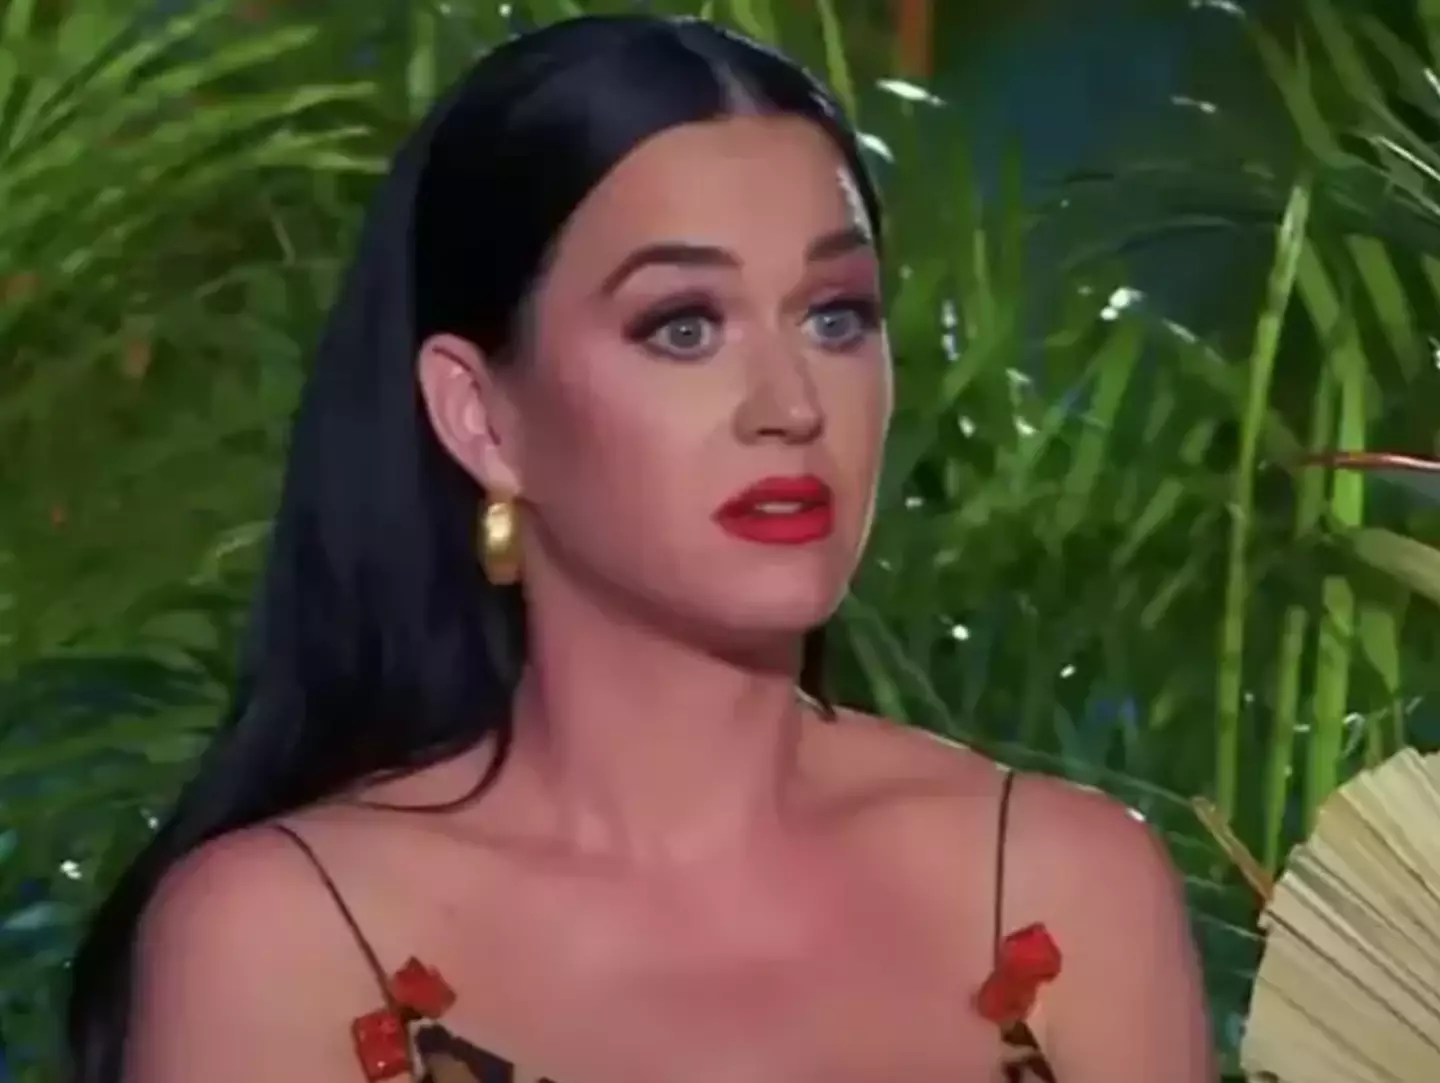 Katy Perry has faced bullying accusations over recent months.